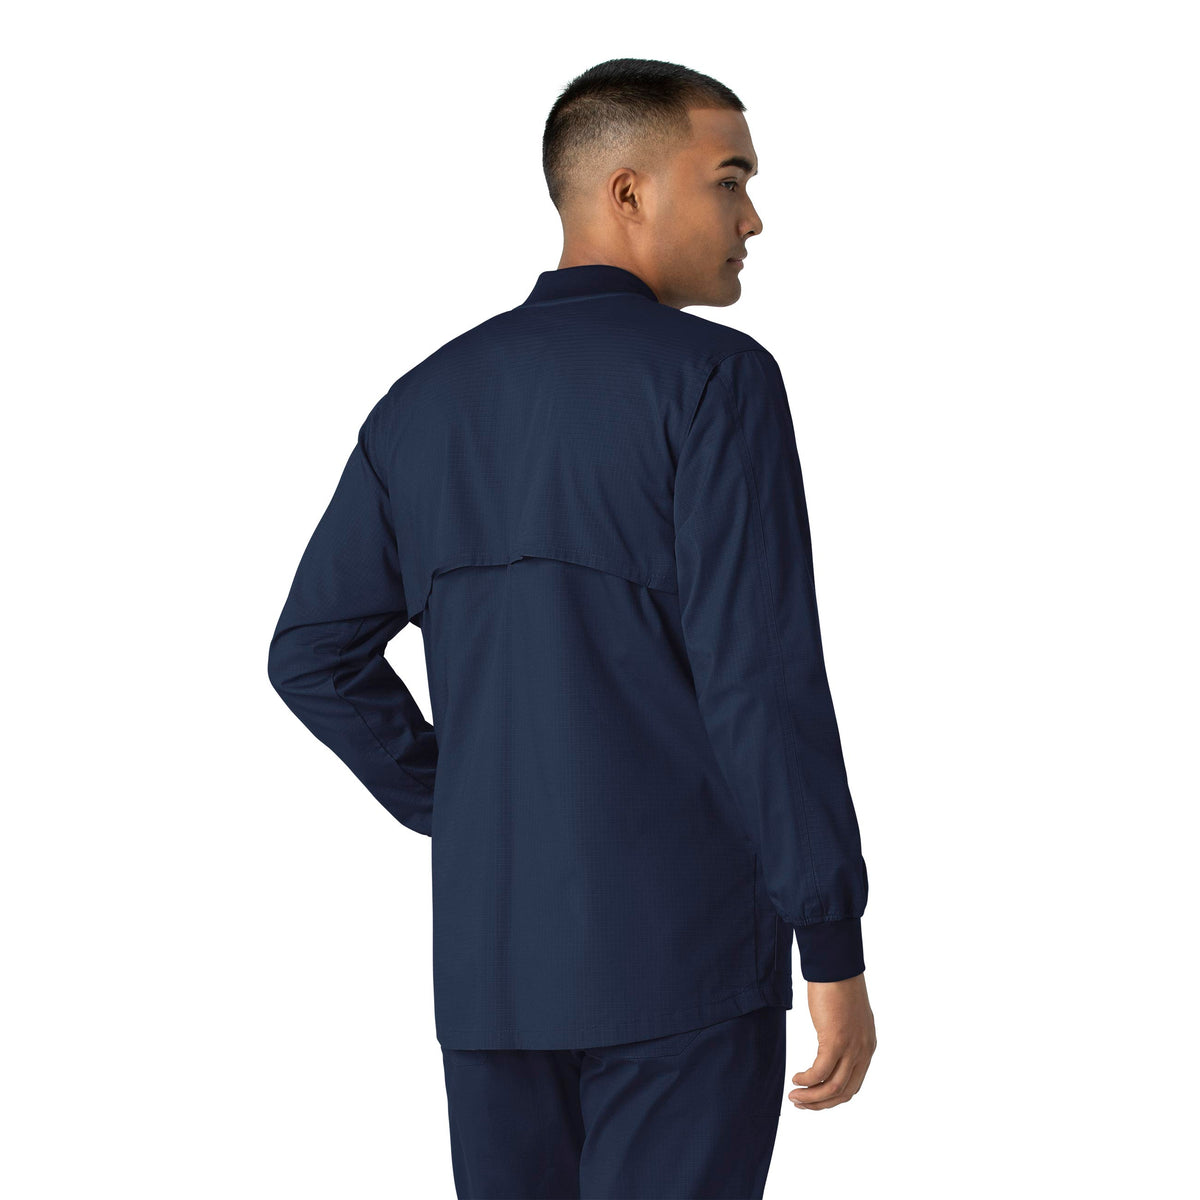 Rugged Flex Ripstop Men's Utility Warm-Up Jacket Navy back view